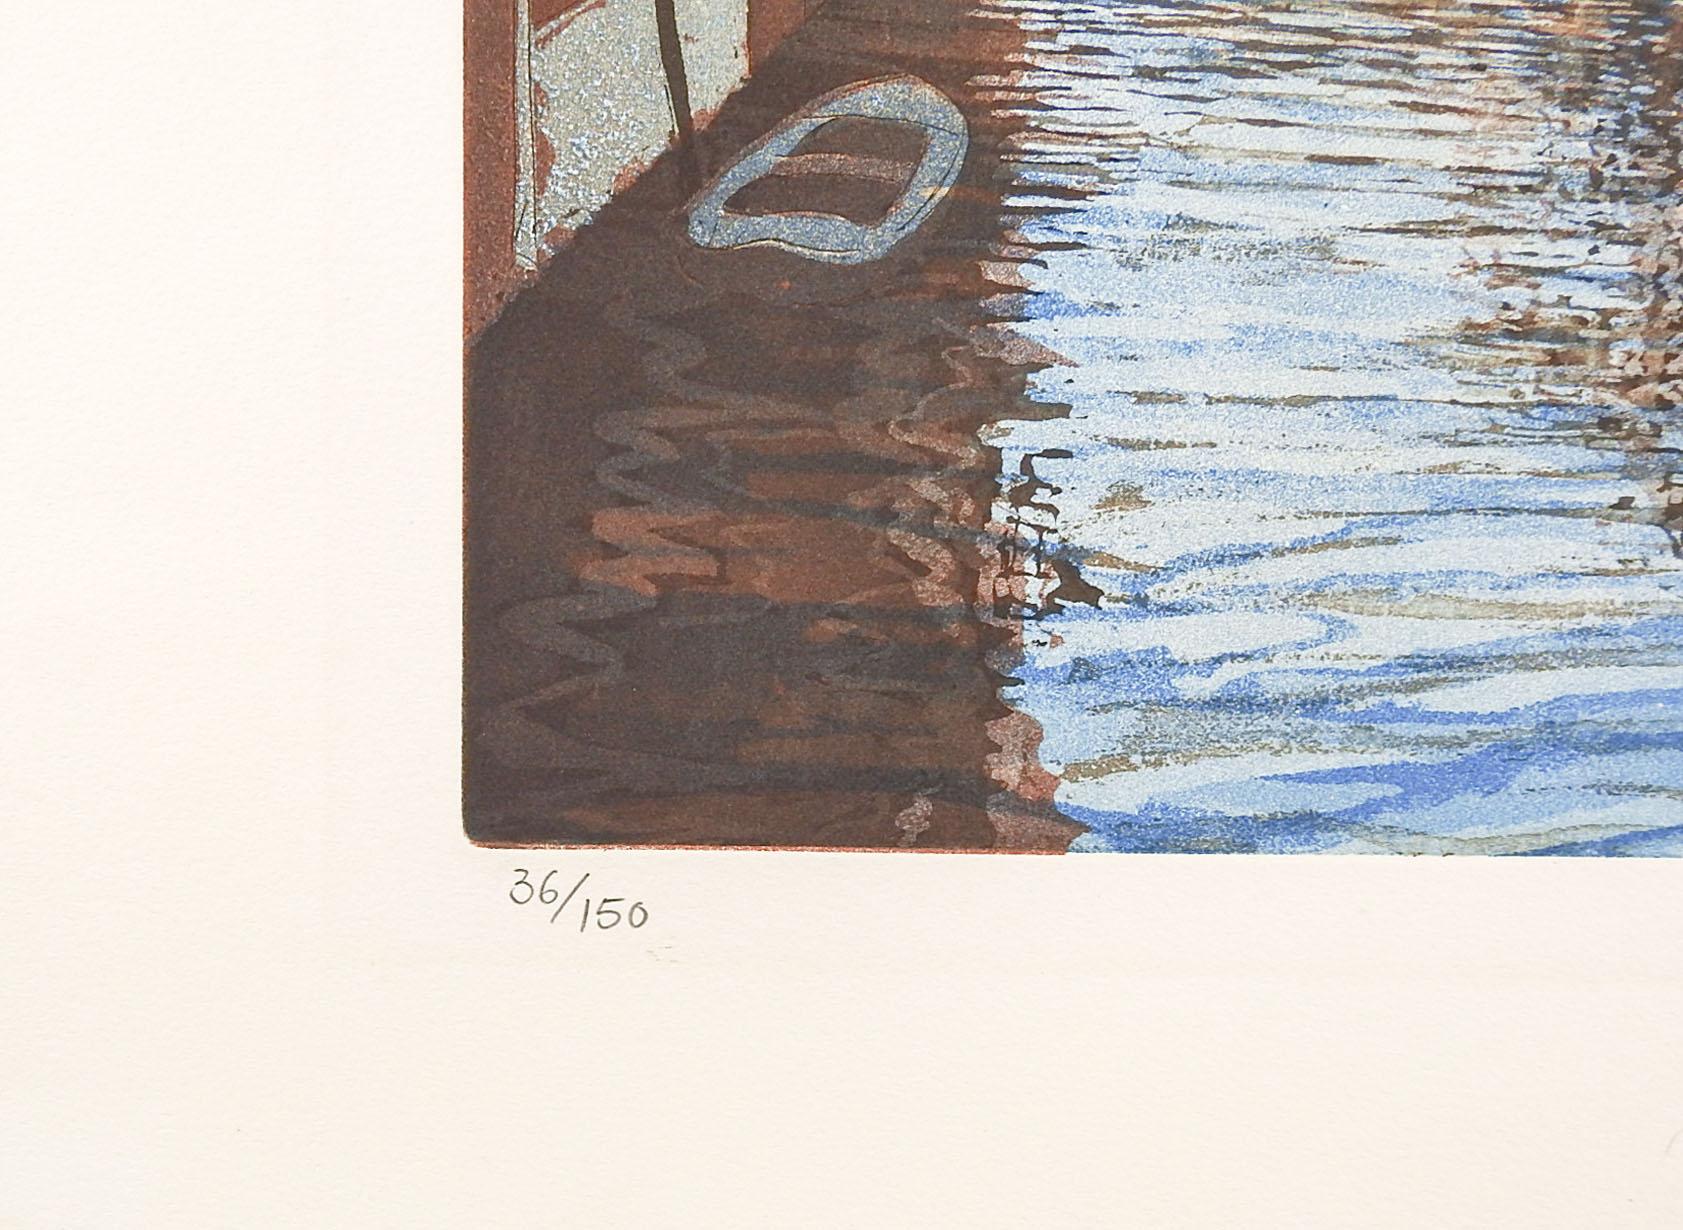 Fondamenta Zen Venice Italy by Frances St. Clair Miller etching on paper. Signed, numbered 36/150 and titled in pencil in lower margin. Unframed, image size 23